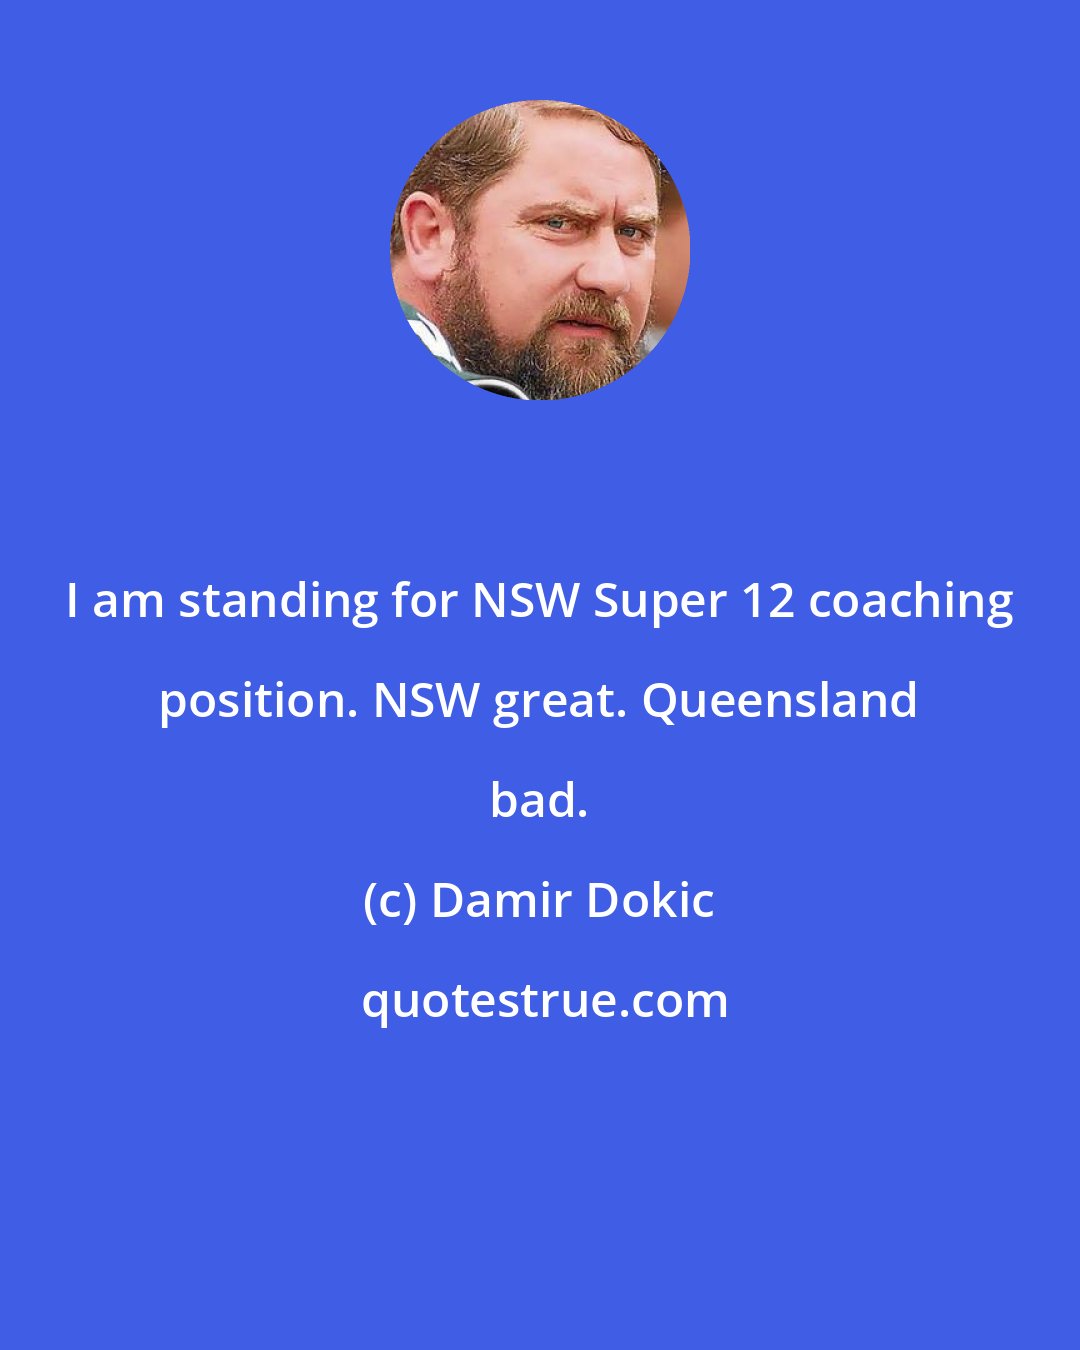 Damir Dokic: I am standing for NSW Super 12 coaching position. NSW great. Queensland bad.